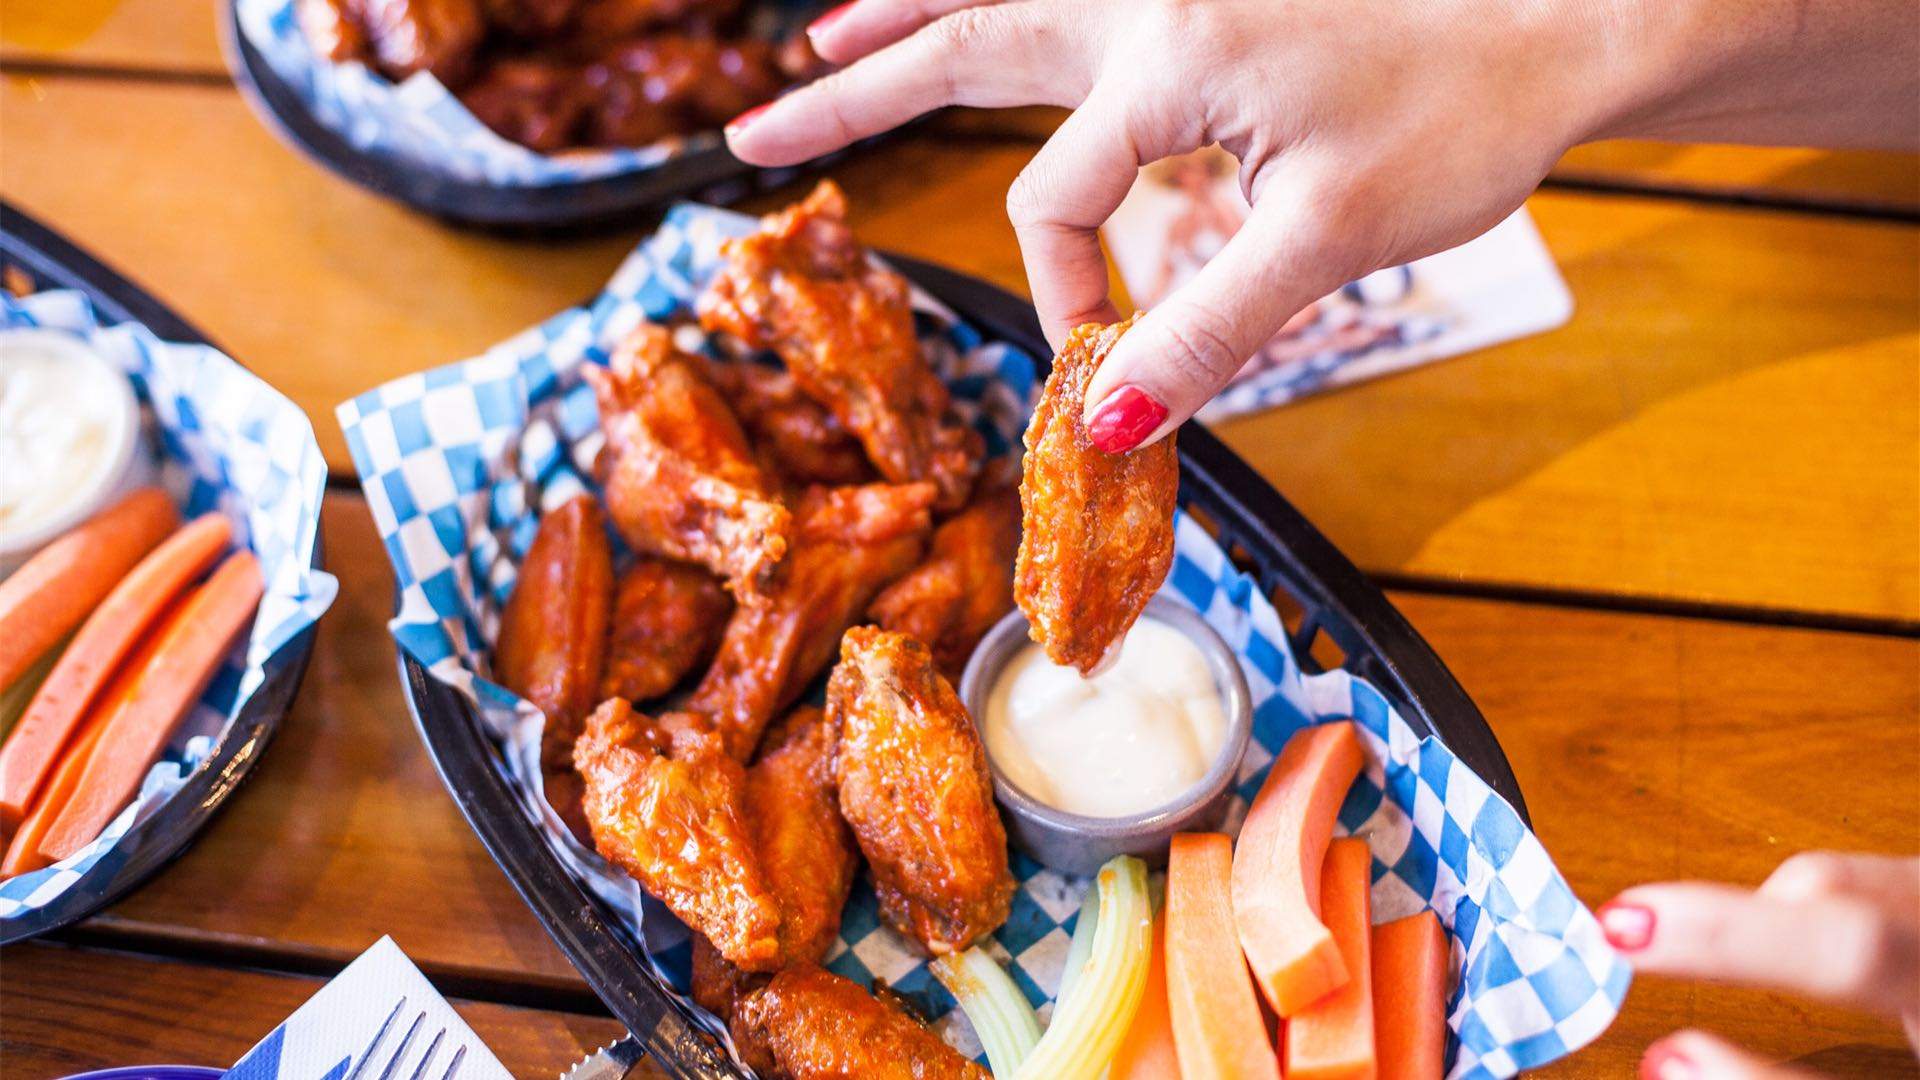 Ten-Cent Wings for National Wing Day